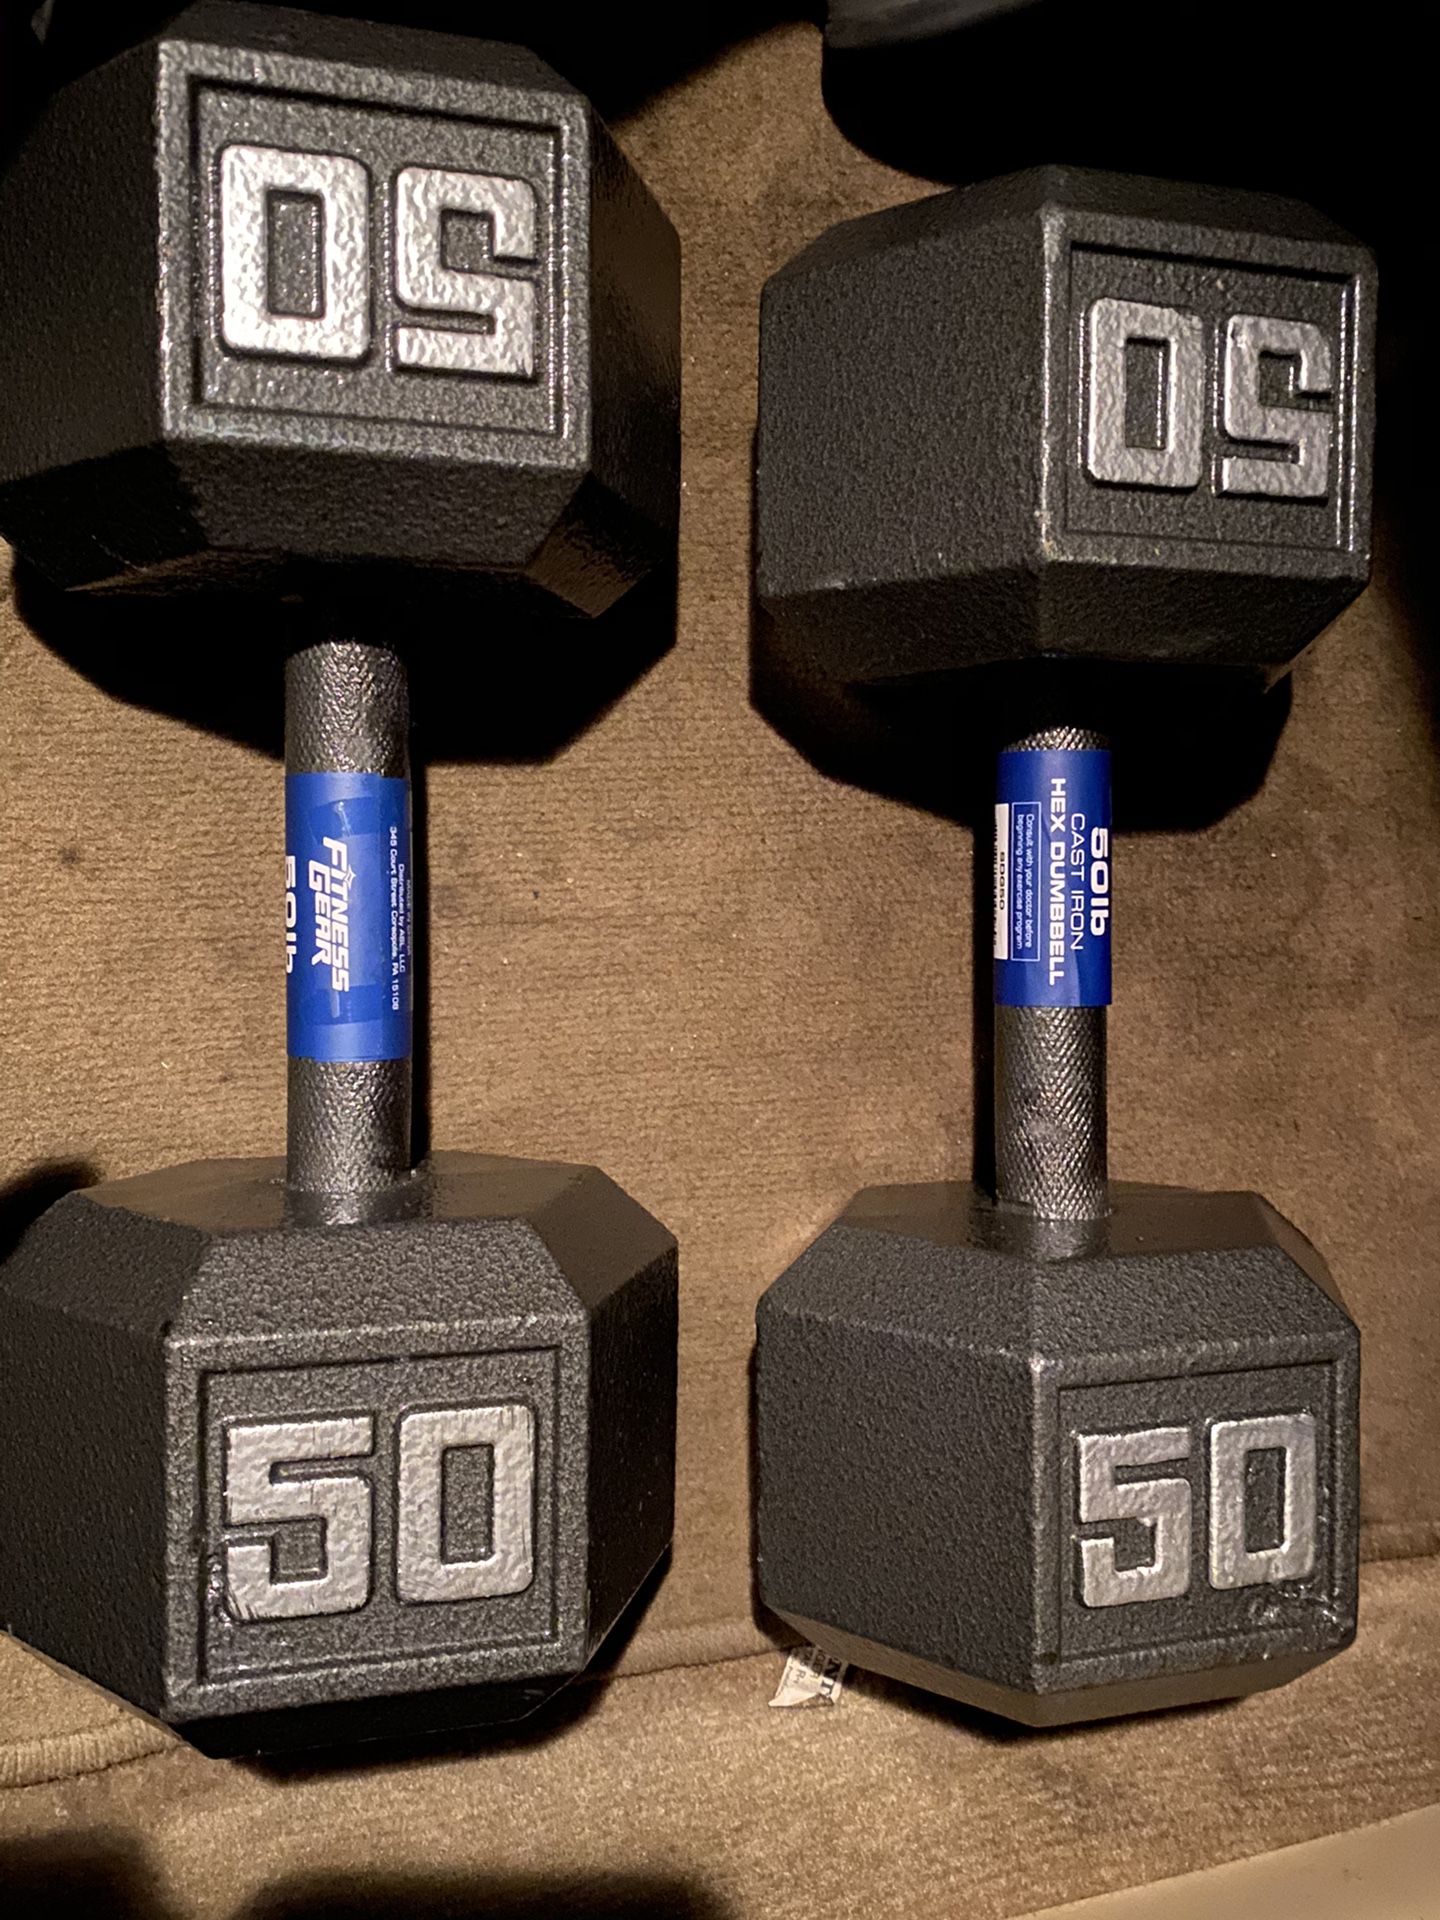 Weights - Brand new fitness gear - 50 lbs dumbell pair